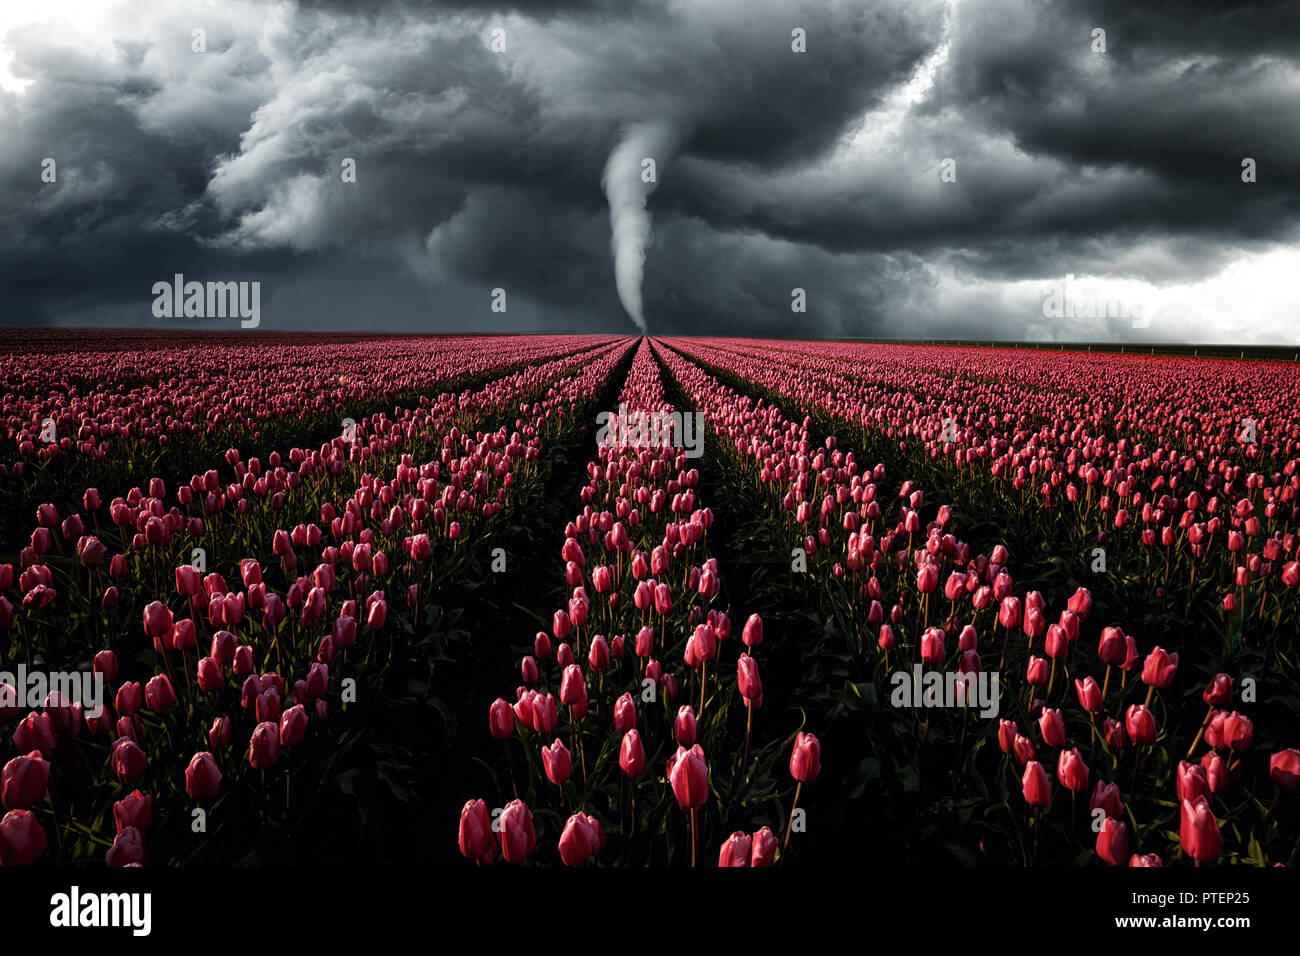 Tornado is raging through a field of Tulips, landscape Stock Photo